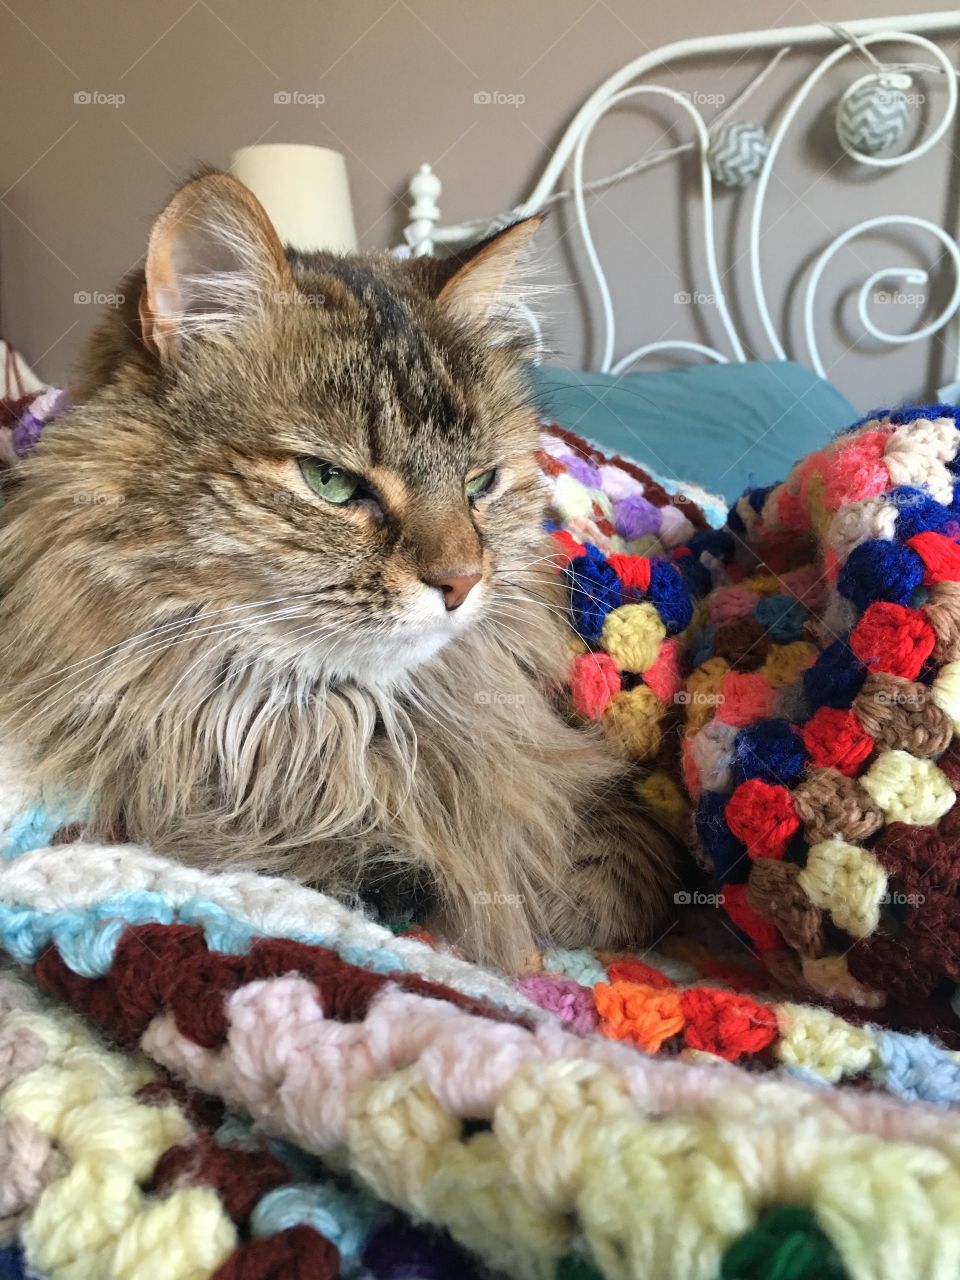 Cat on colorful blanket